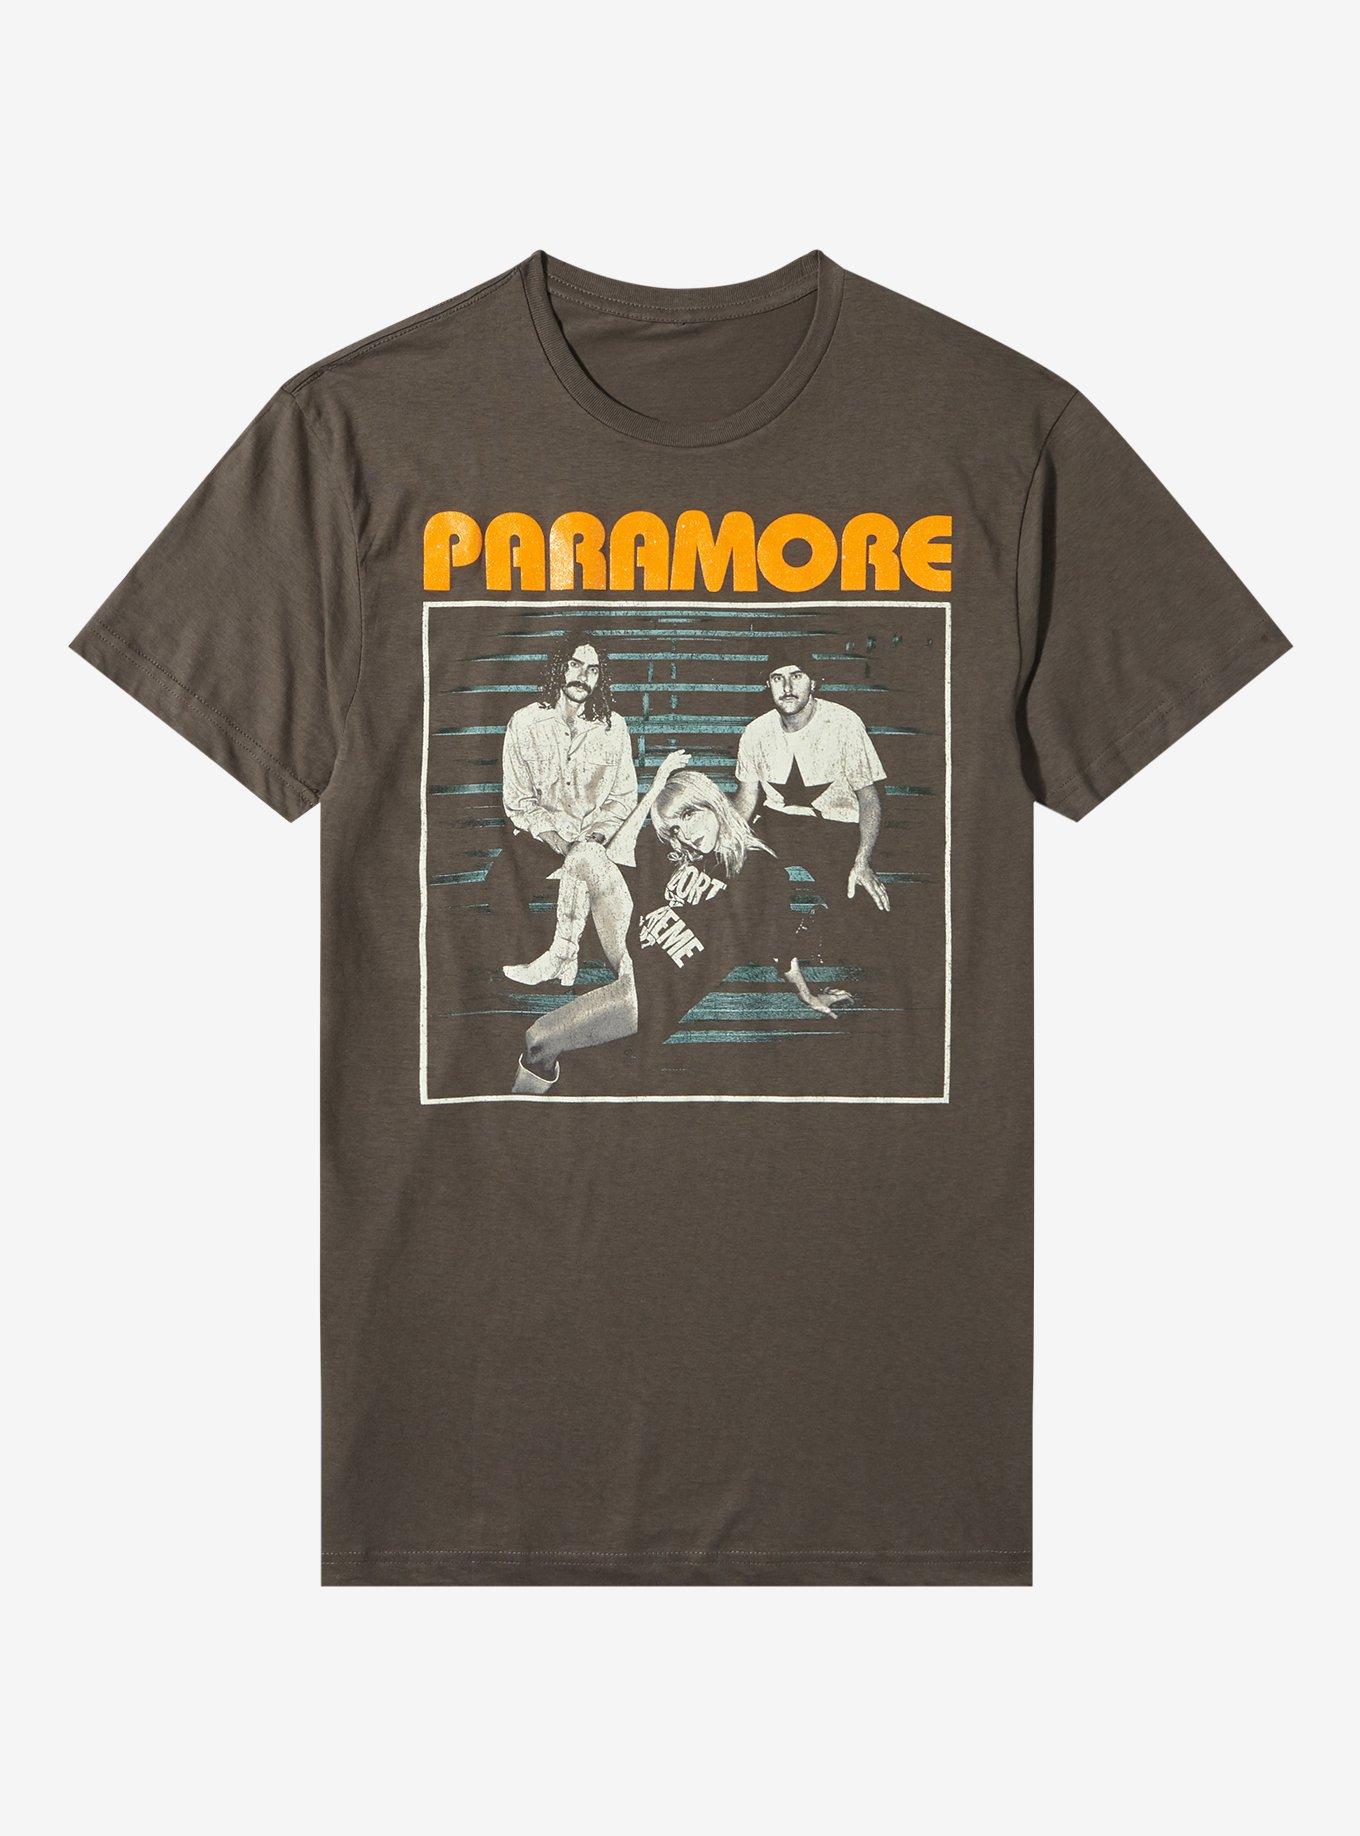 Paramore This Is Why Concert Tour Shirt, Rock Band Fan T-shirt - Print your  thoughts. Tell your stories.